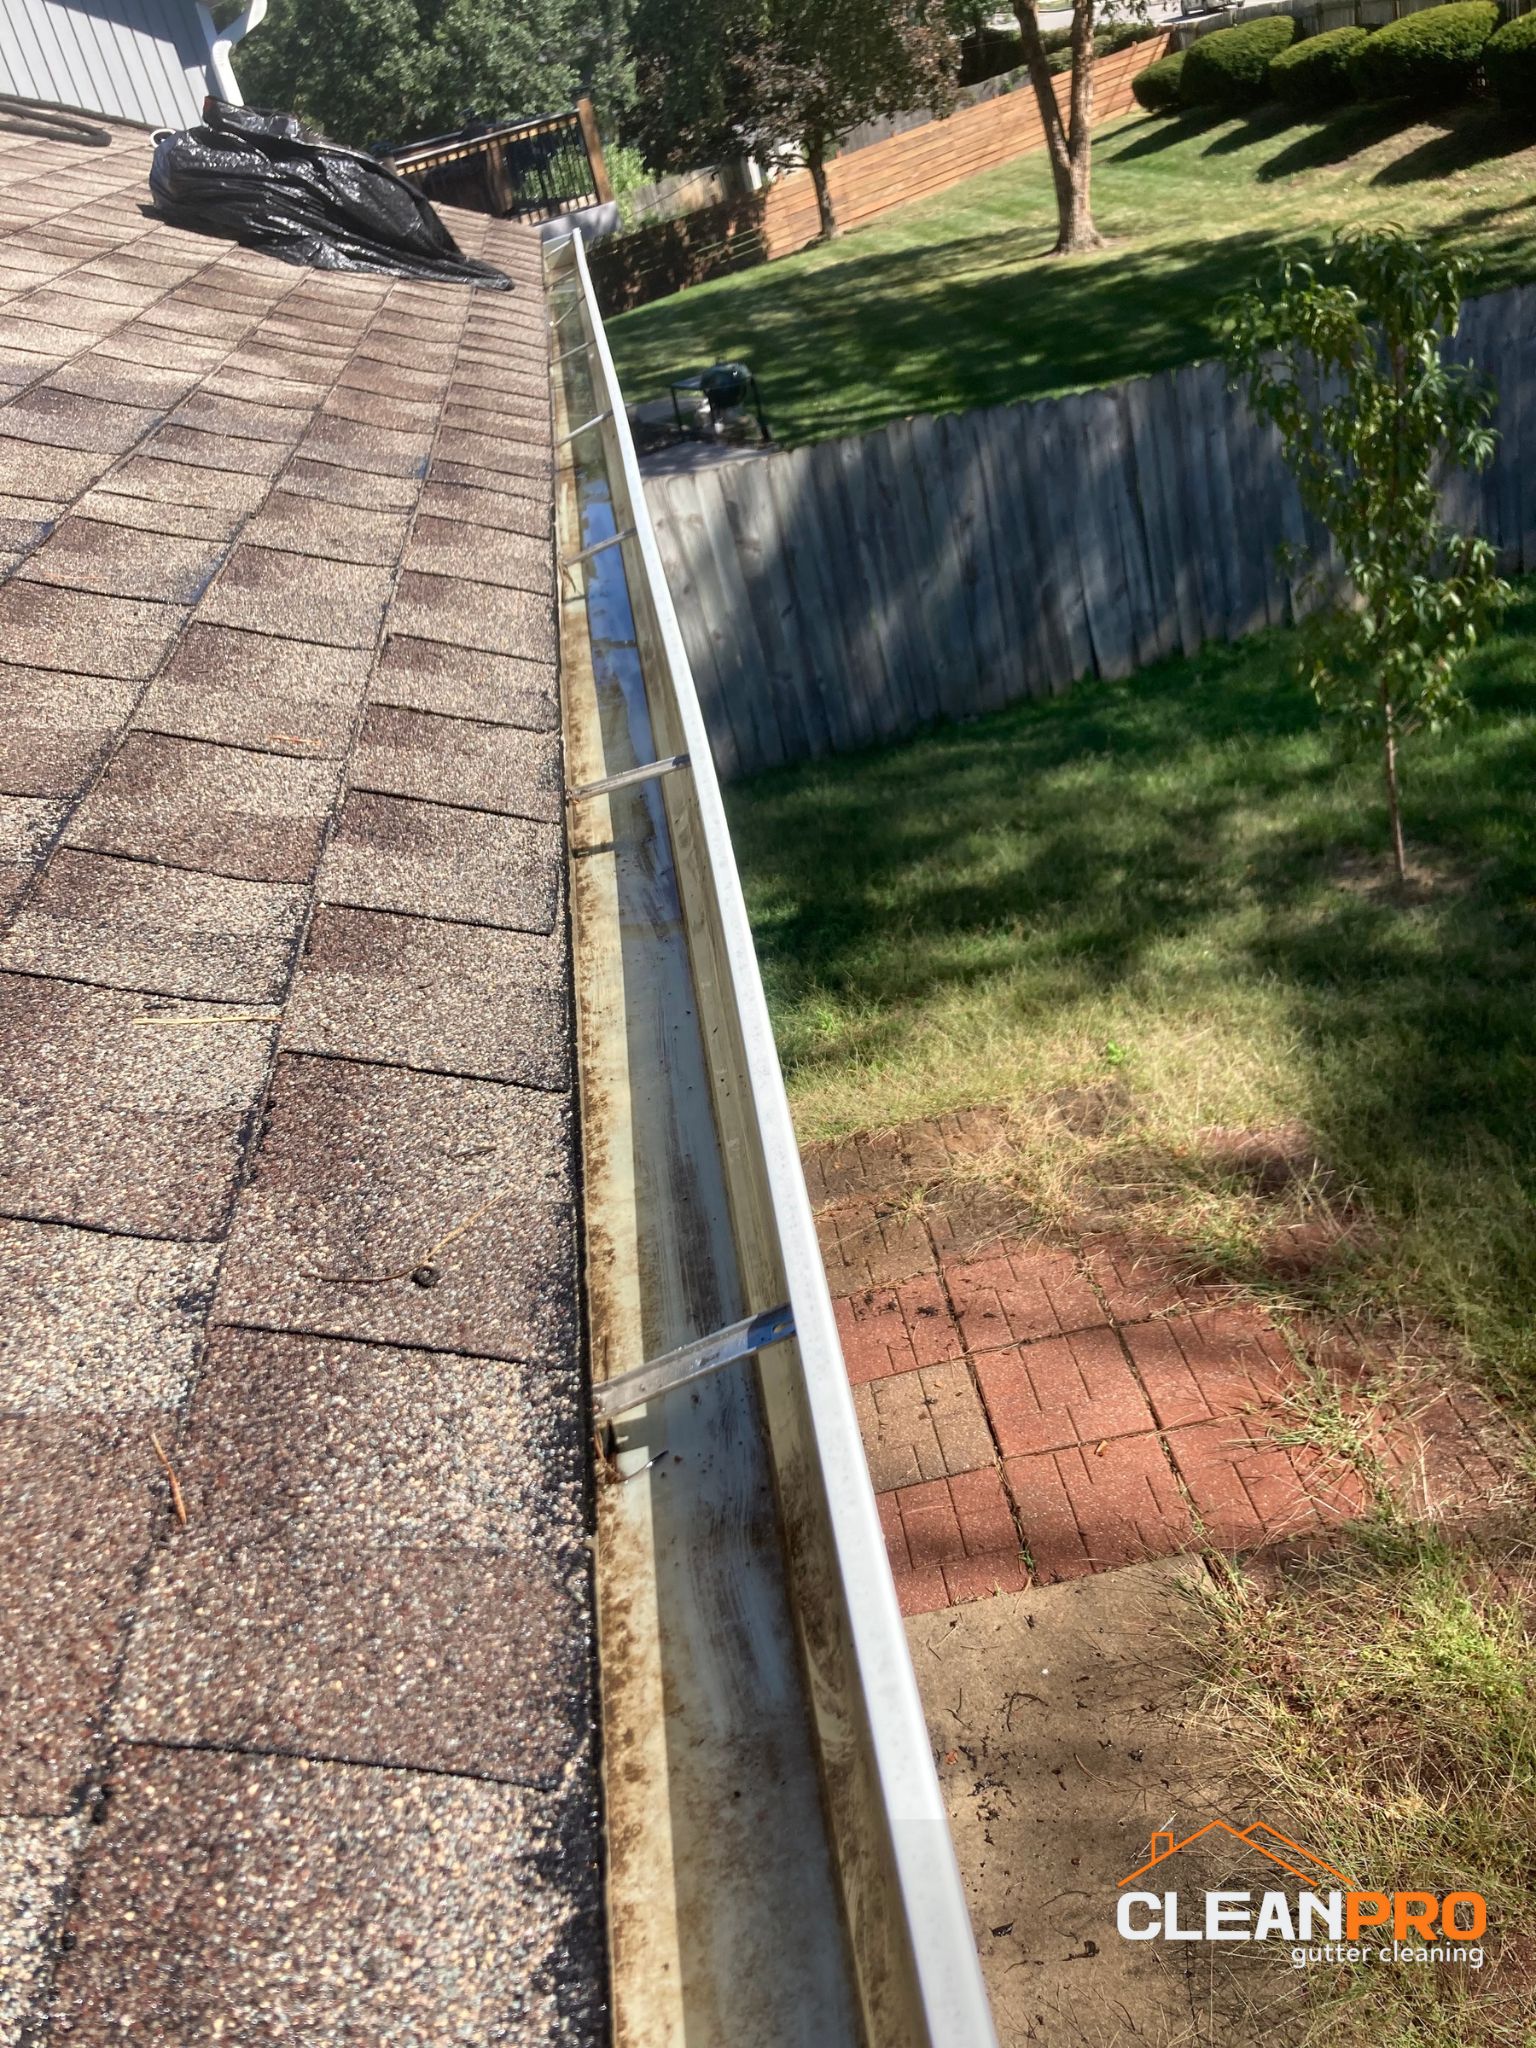 Local Gutter Cleaning in Staten Island